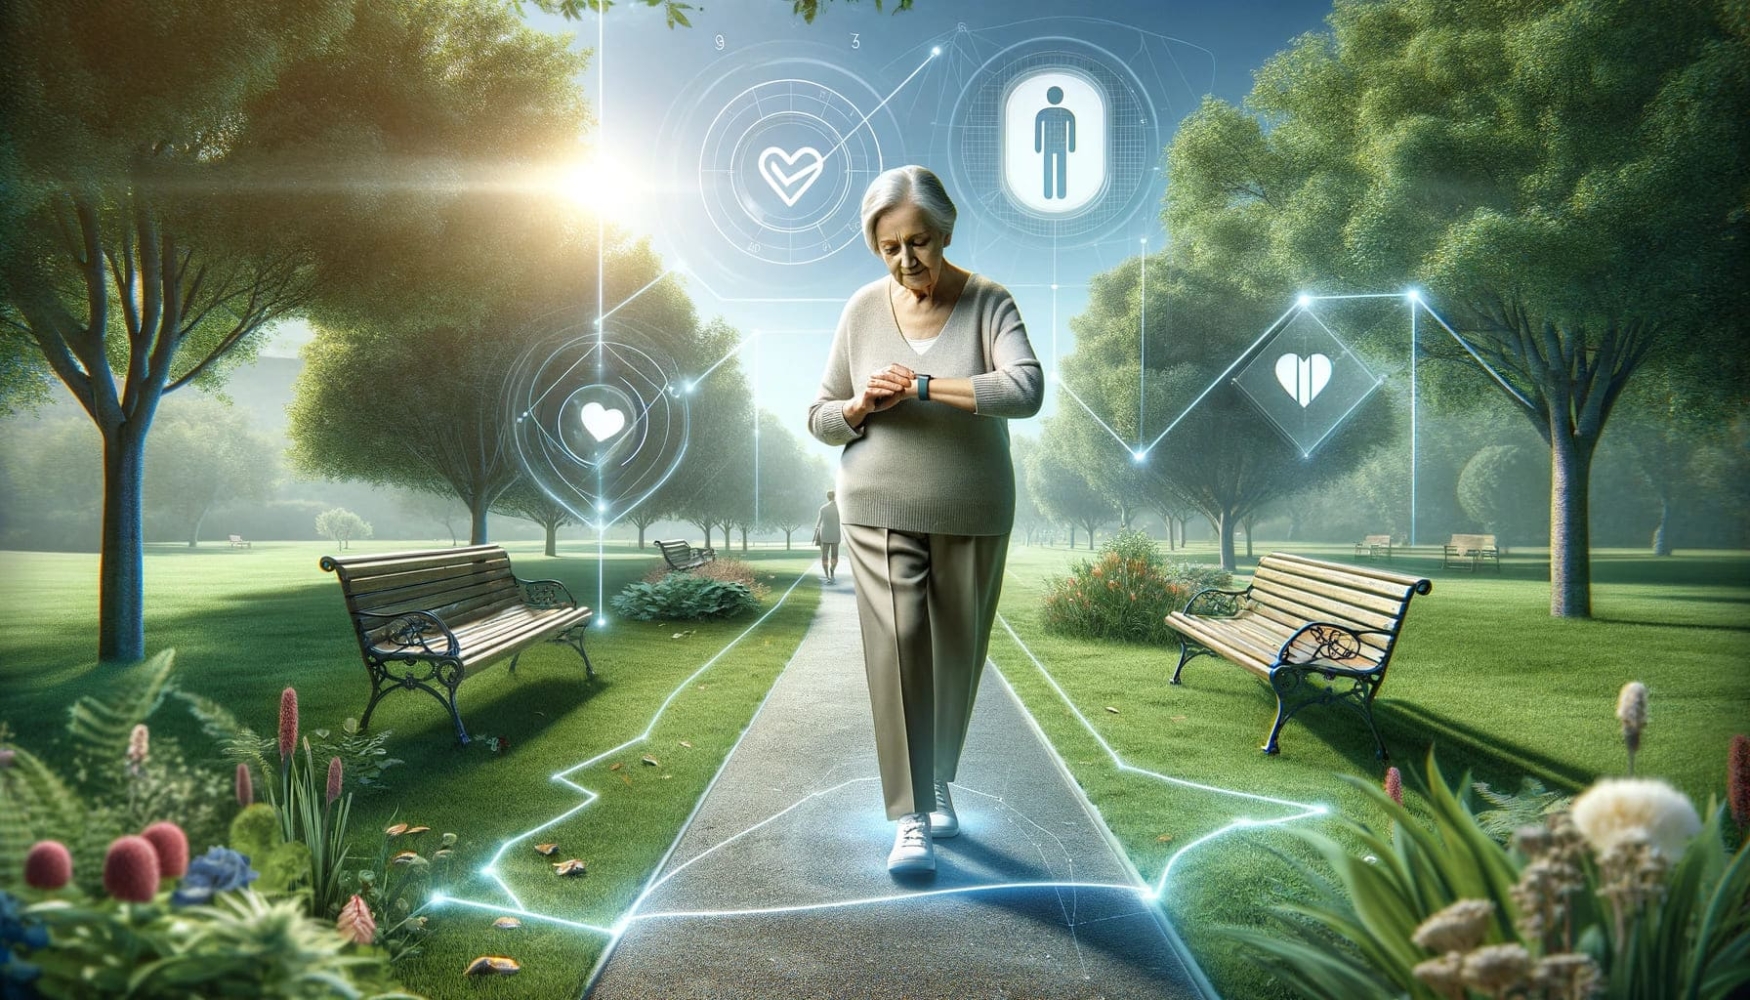 An elderly woman is walking in a park, wearing a GPS tracker on her wrist. Digital icons float around her, symbolizing the safety net that keeps her safe with dementia